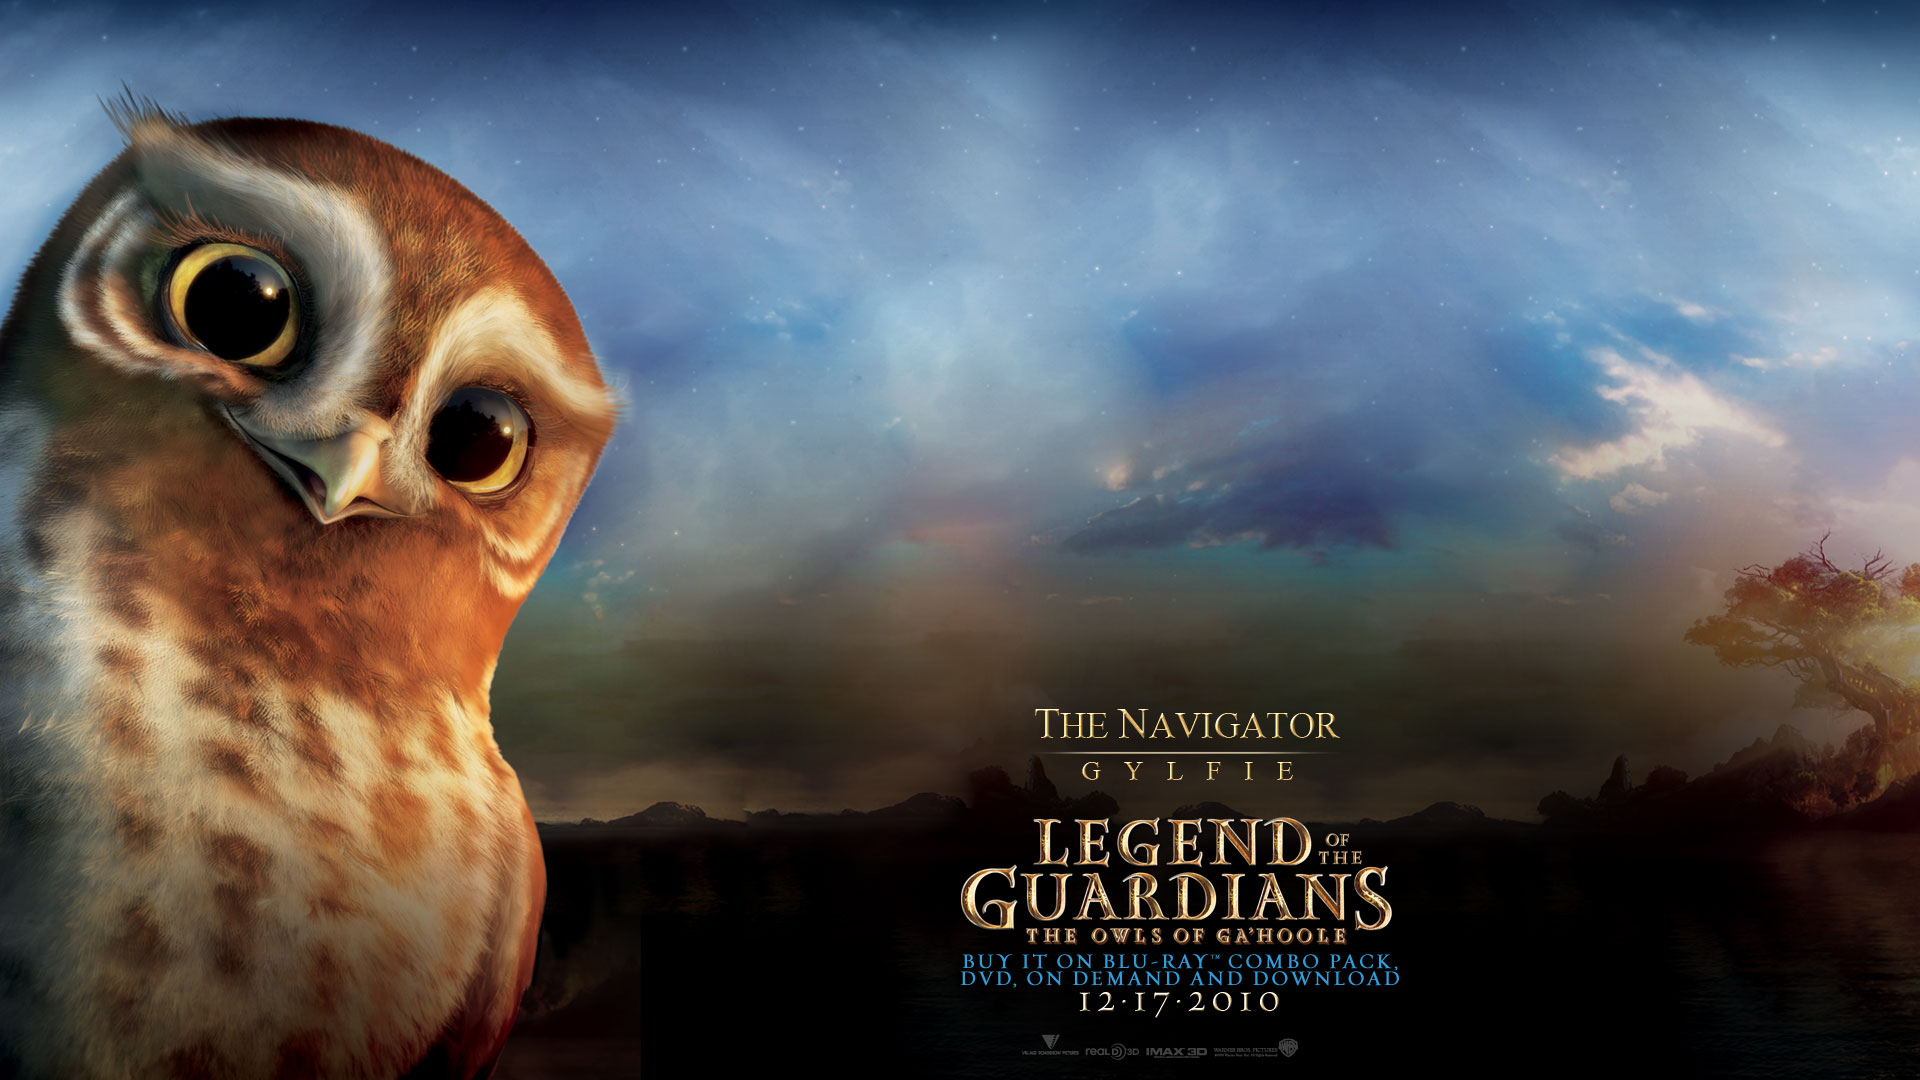 Legend Of The Guardians: The Owls Of Ga'Hoole Backgrounds, Compatible - PC, Mobile, Gadgets| 1920x1080 px